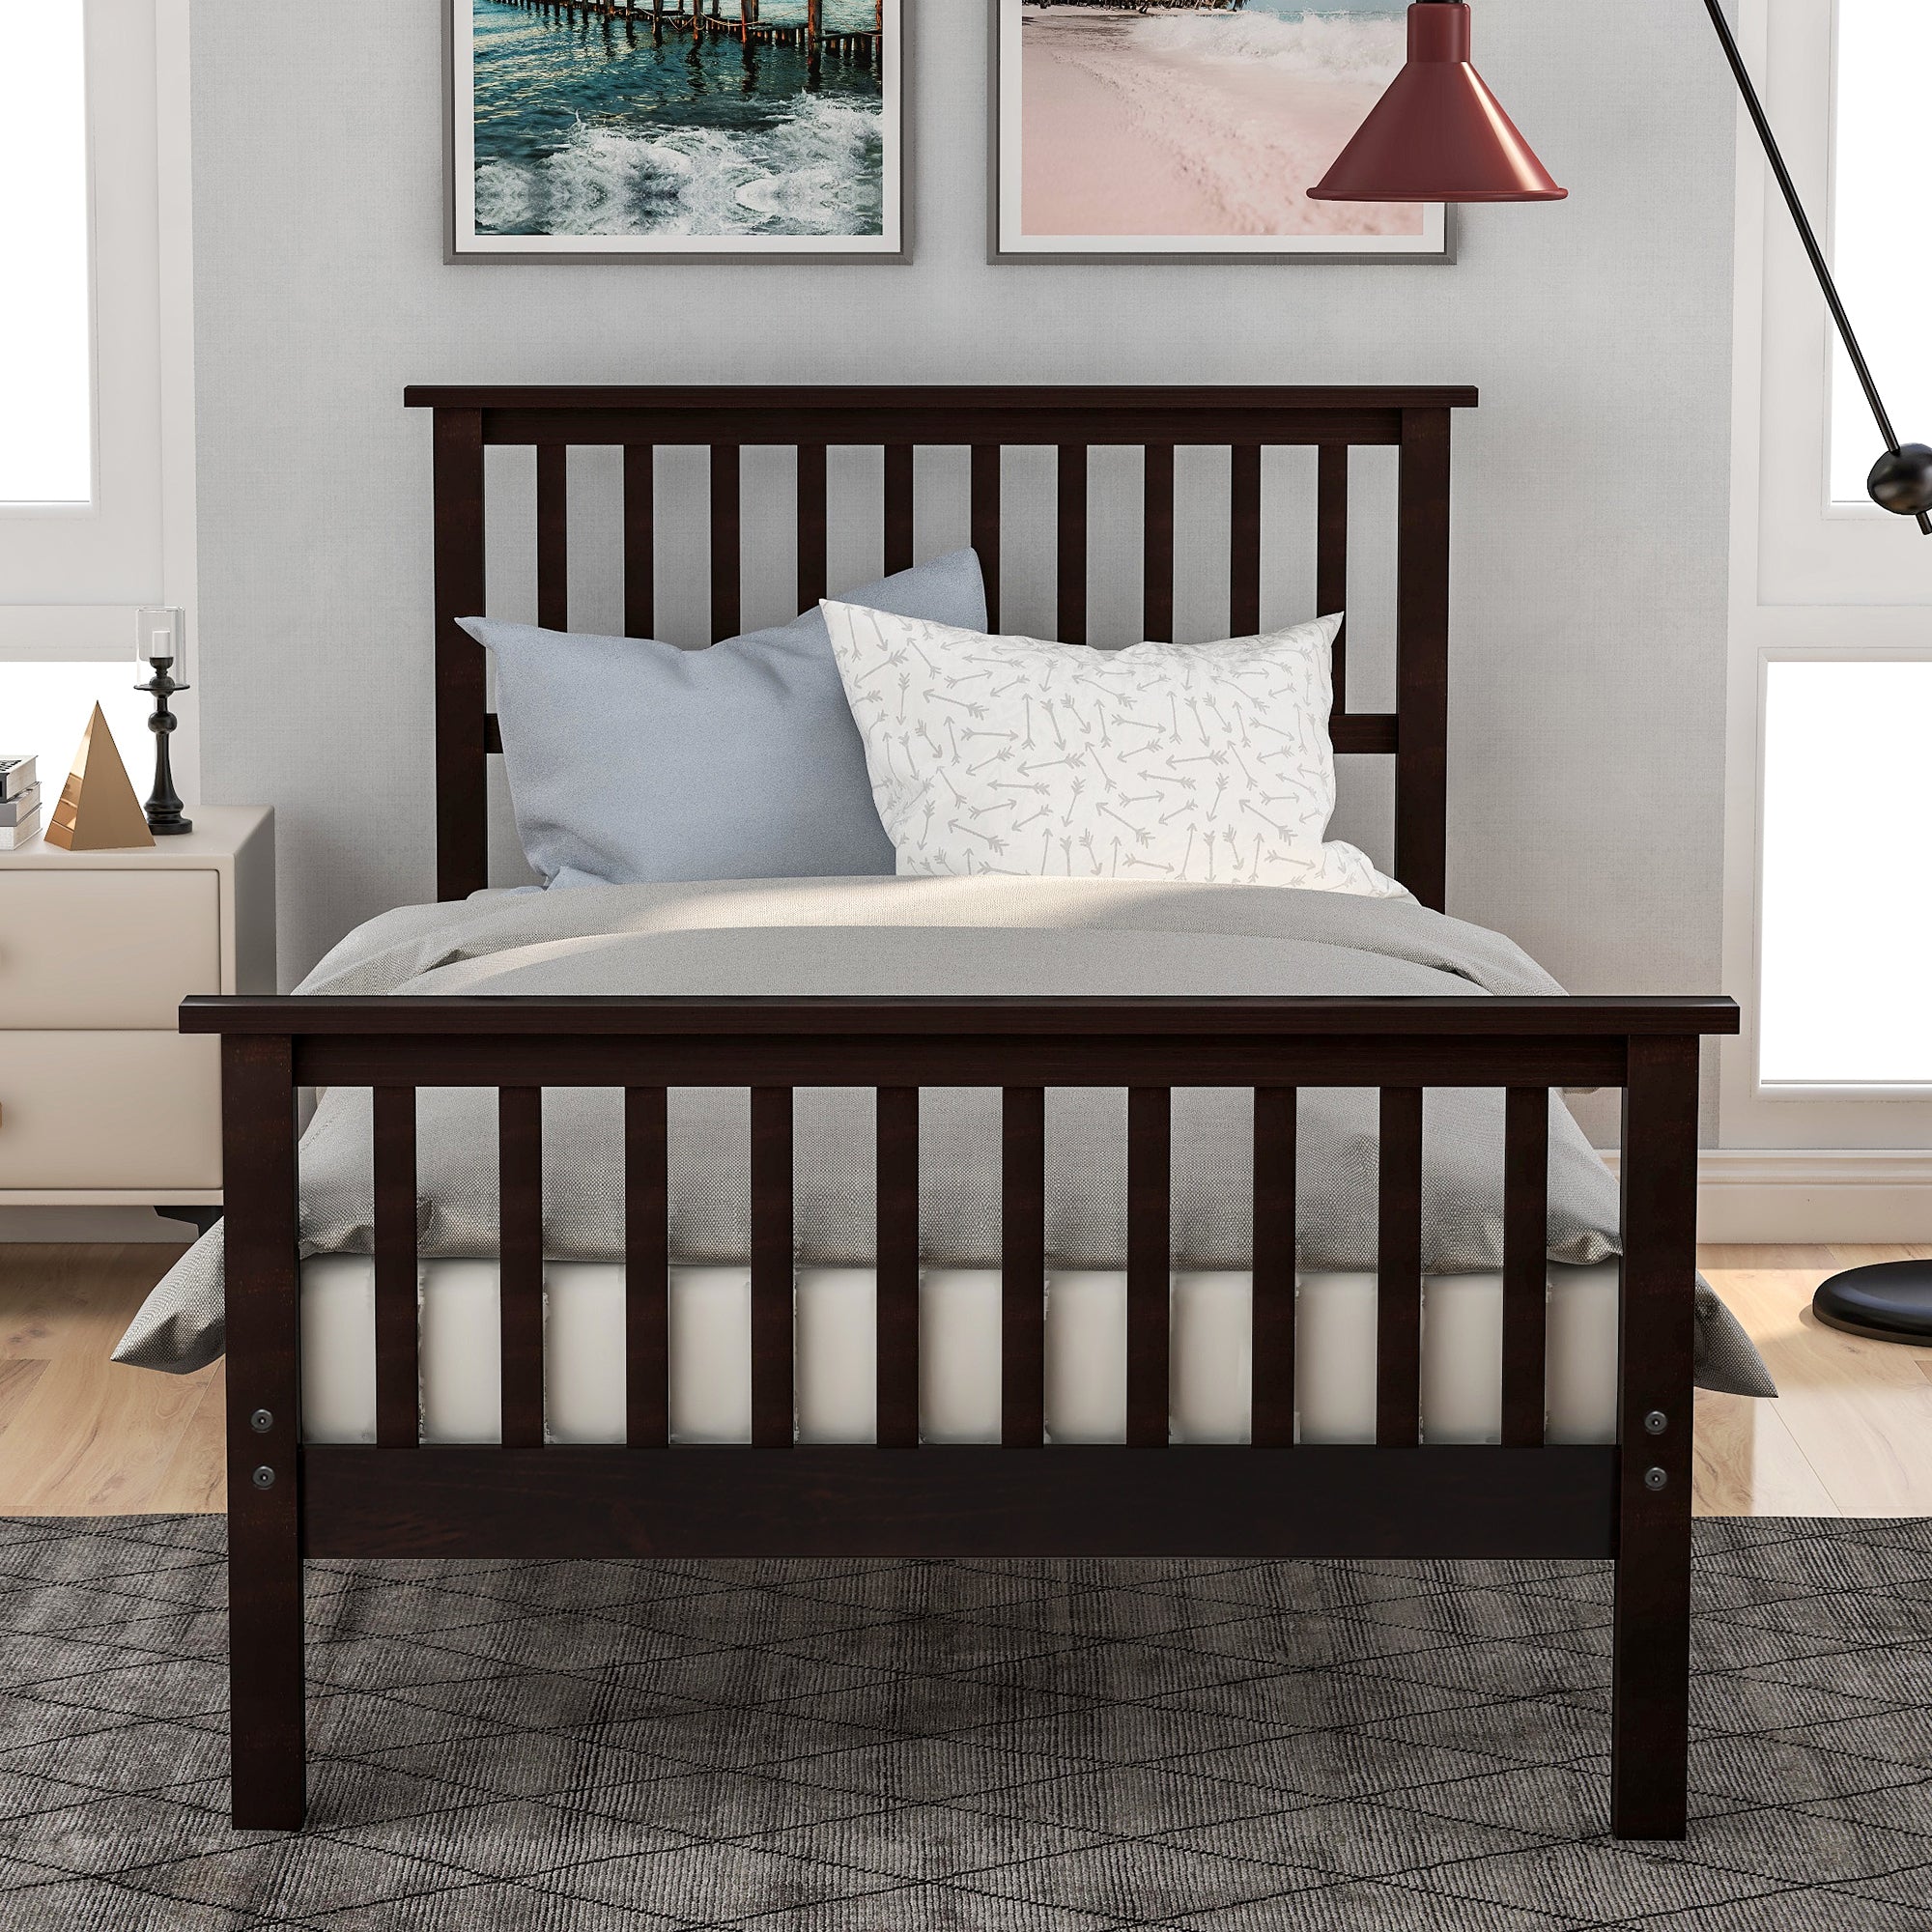 Twin Wood Platform Bed Frame with Headboard and Footboard By: Alabama Beds